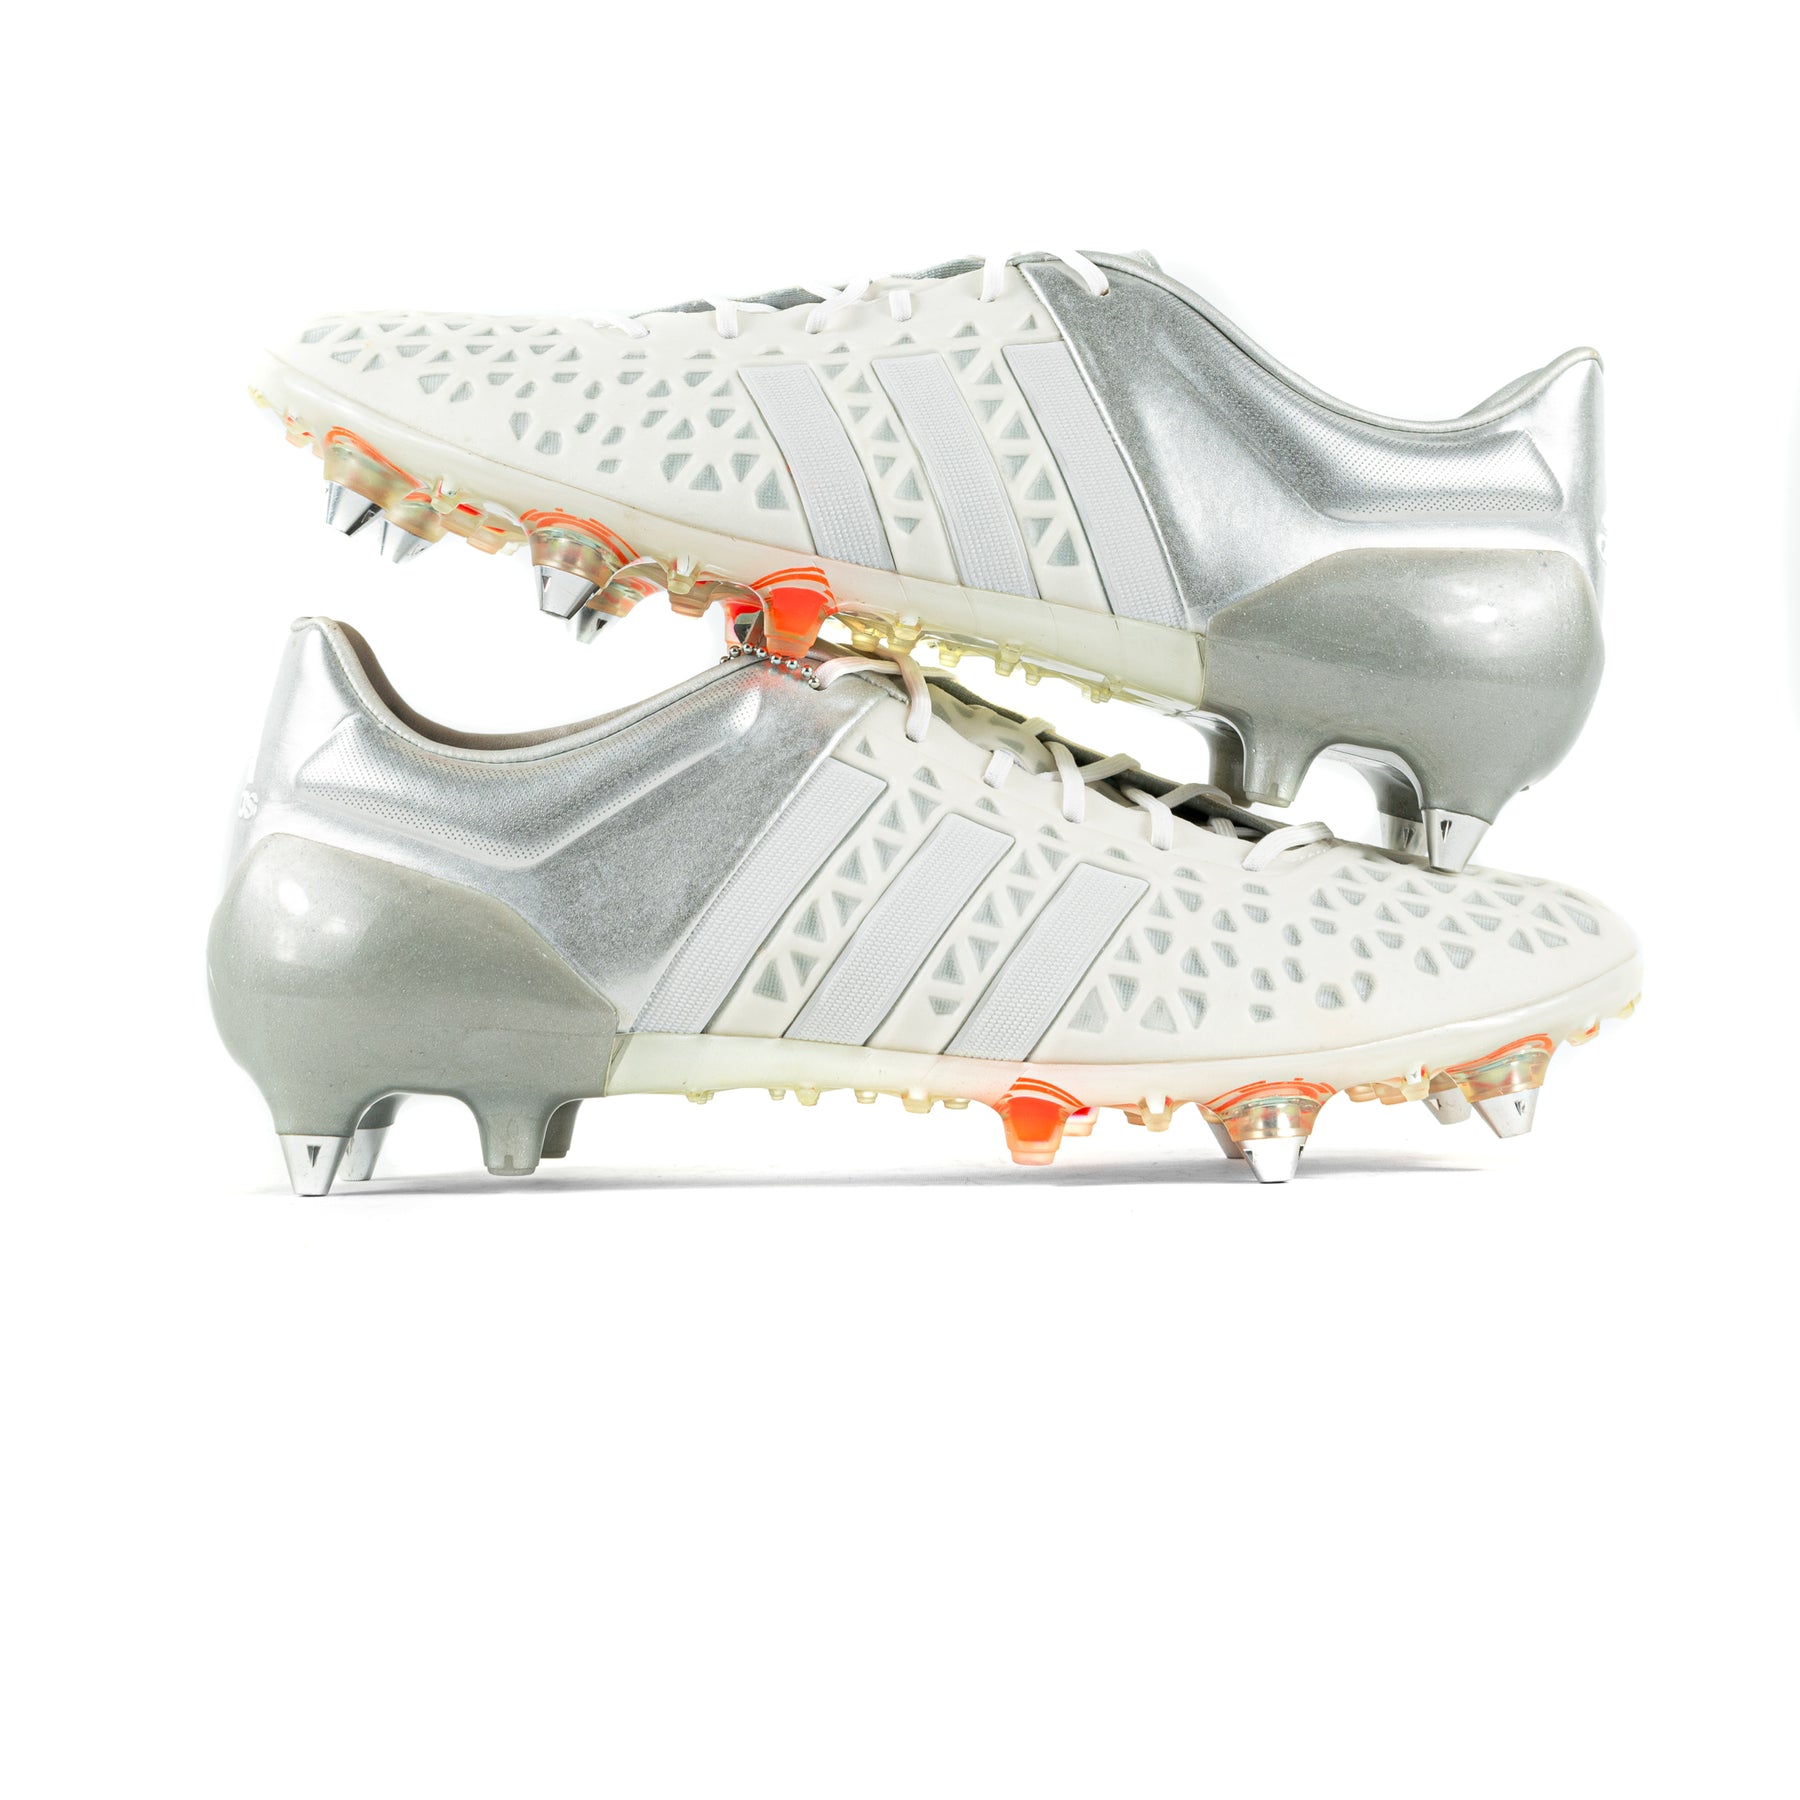 Adidas Ace 15.1 SG – Classic Soccer Cleats